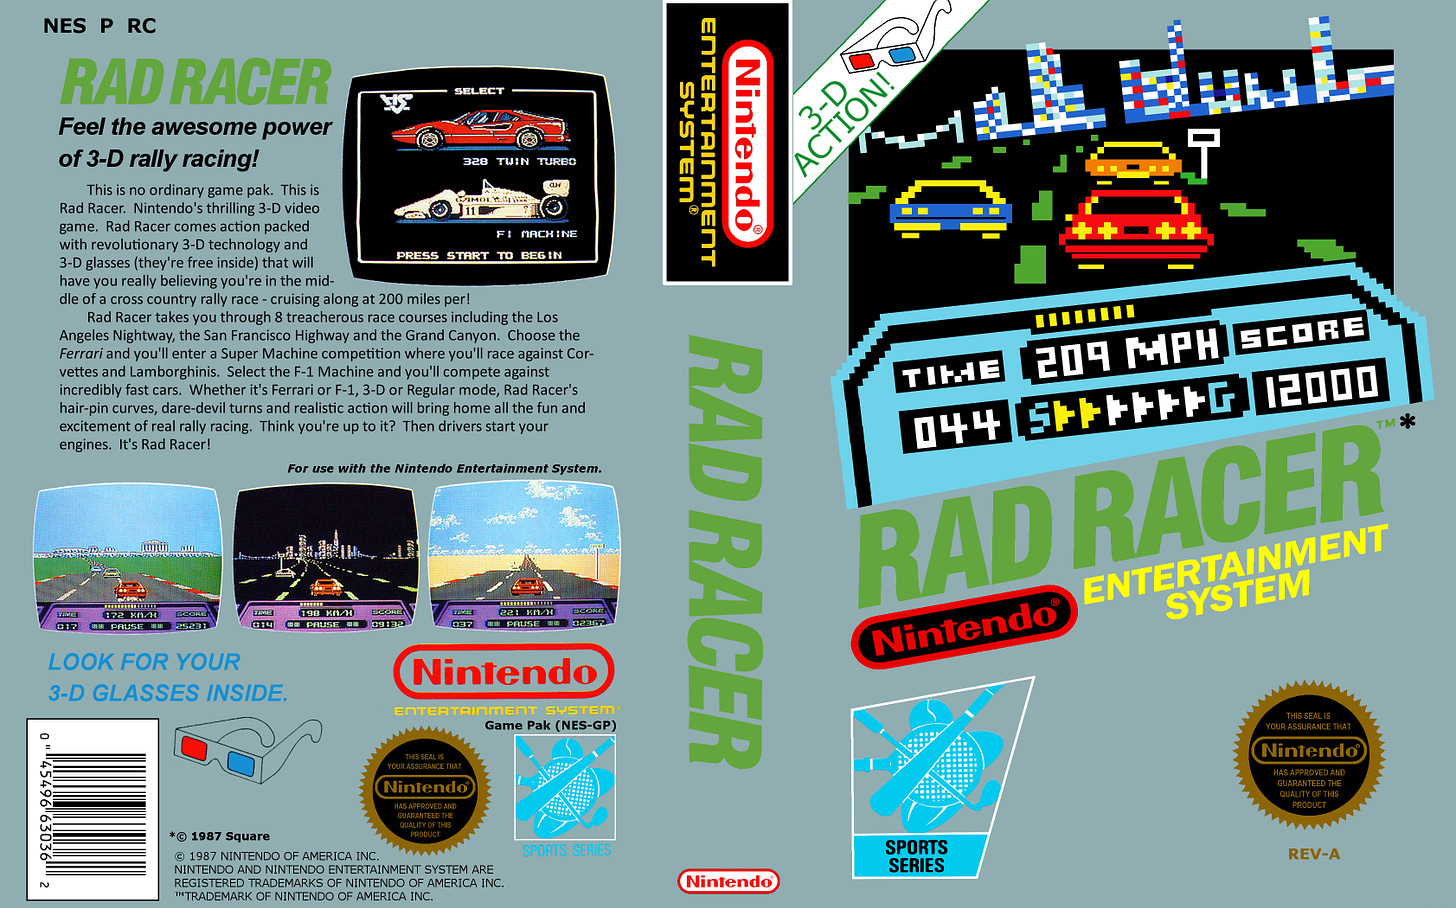 The back and front of Rad Racer's box art, featuring the game's 3D glasses, the two cars you can drive, as well as a description of the game playing up its 3D capabilities.